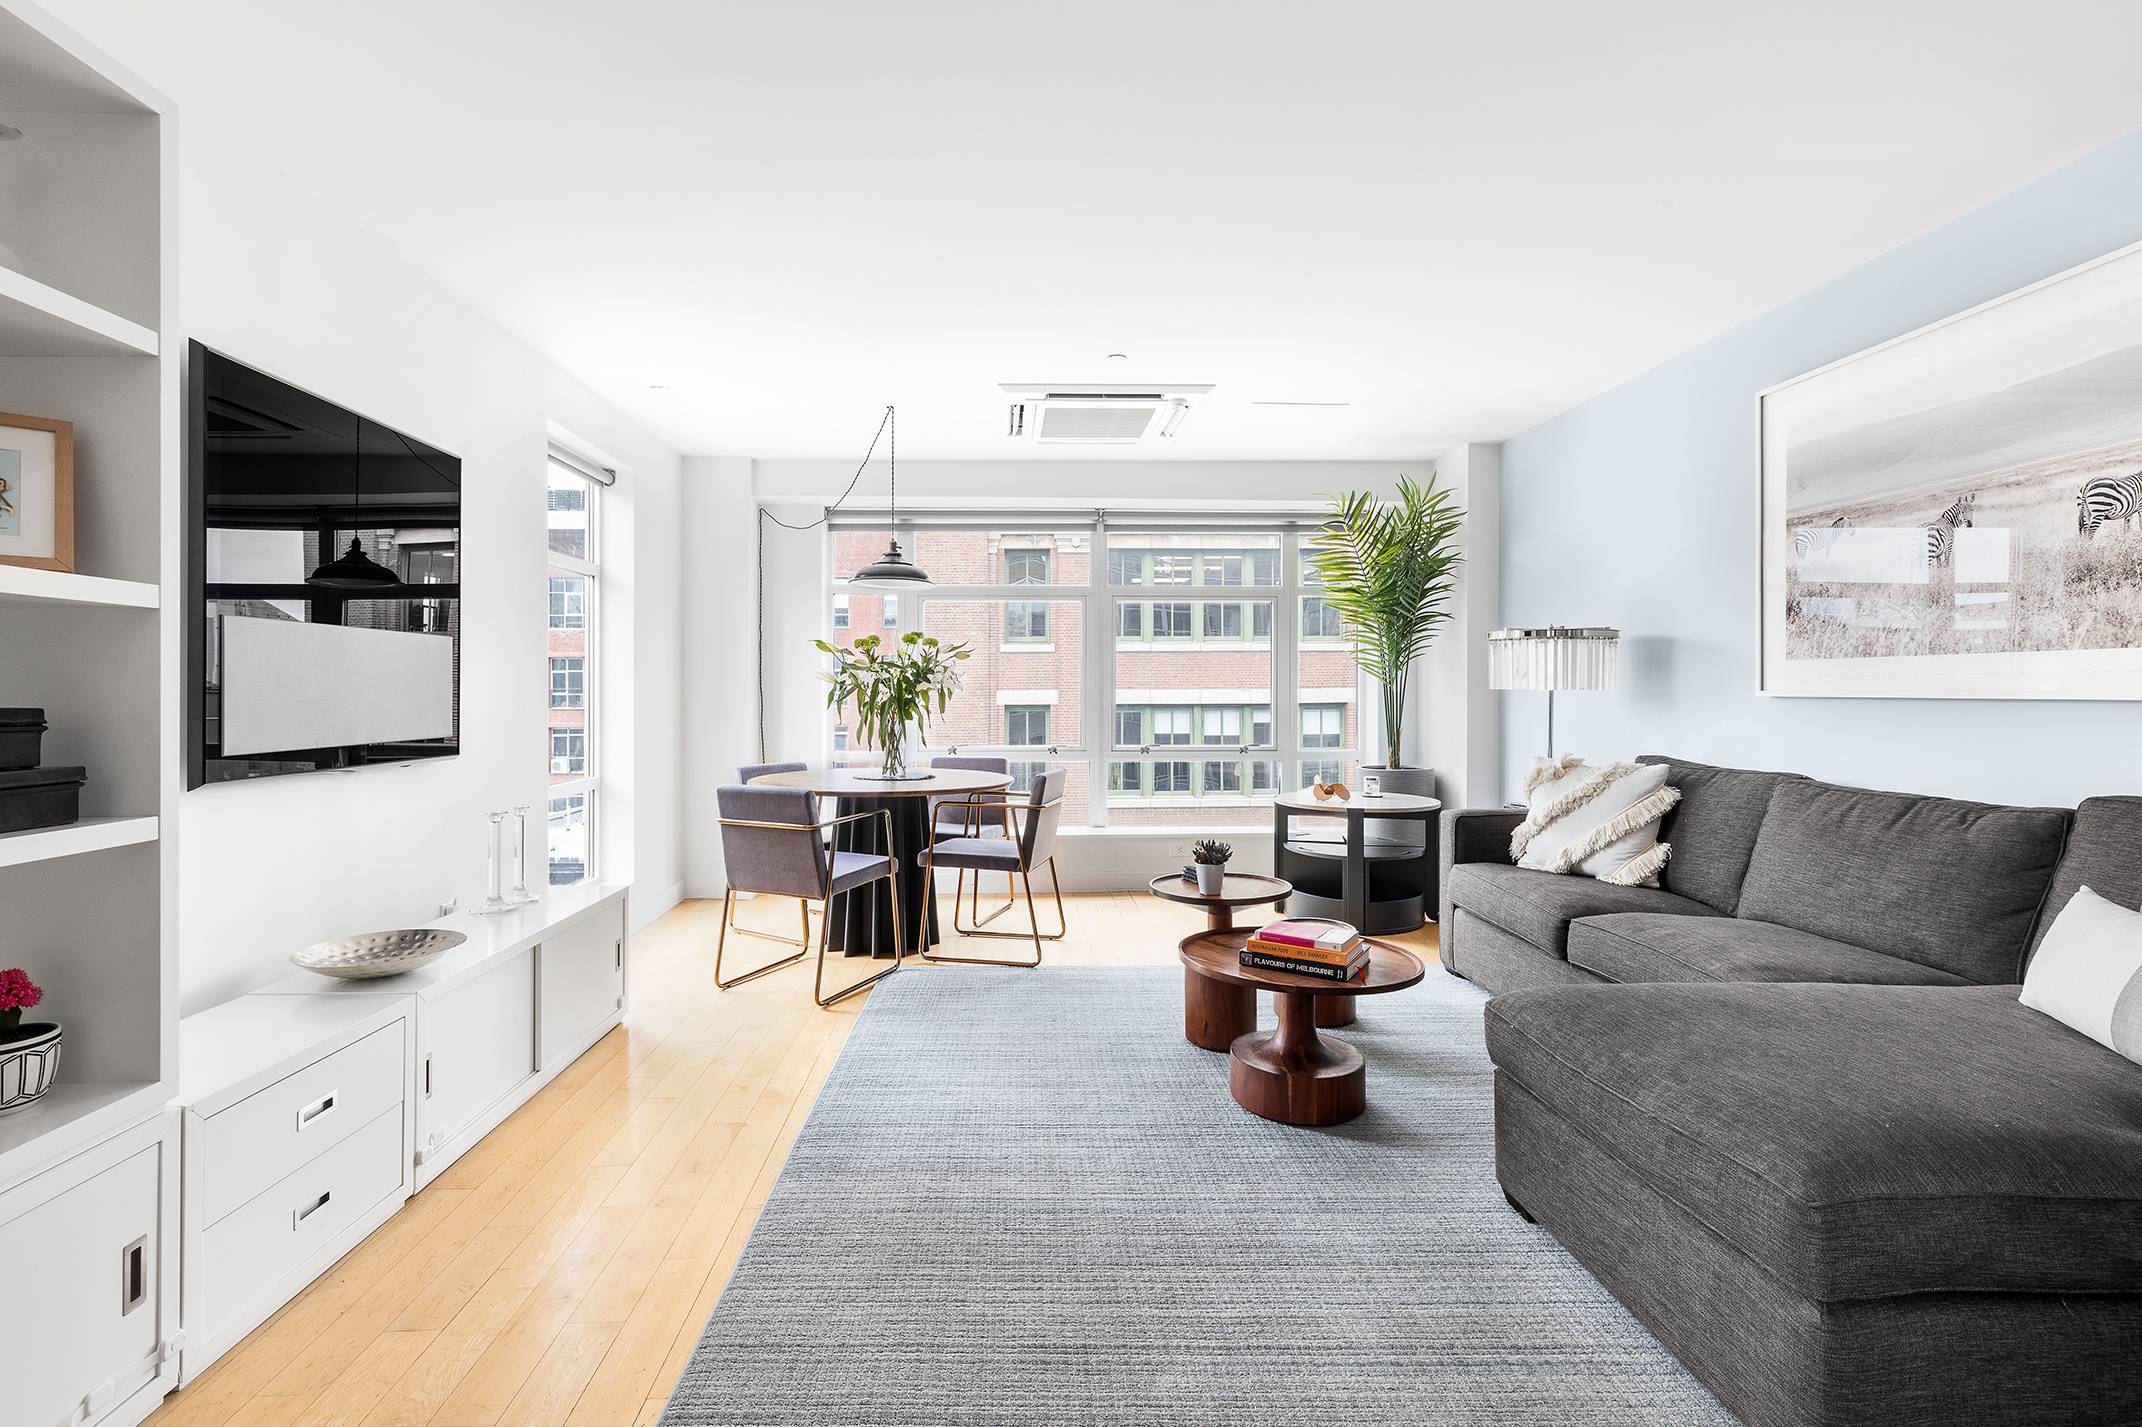 Streaming with sunlight and featuring city views, this strikingly renovated 2 bed, 2 bathroom condo with private outdoor space in a boutique building is vibrantly located just minutes to the ...